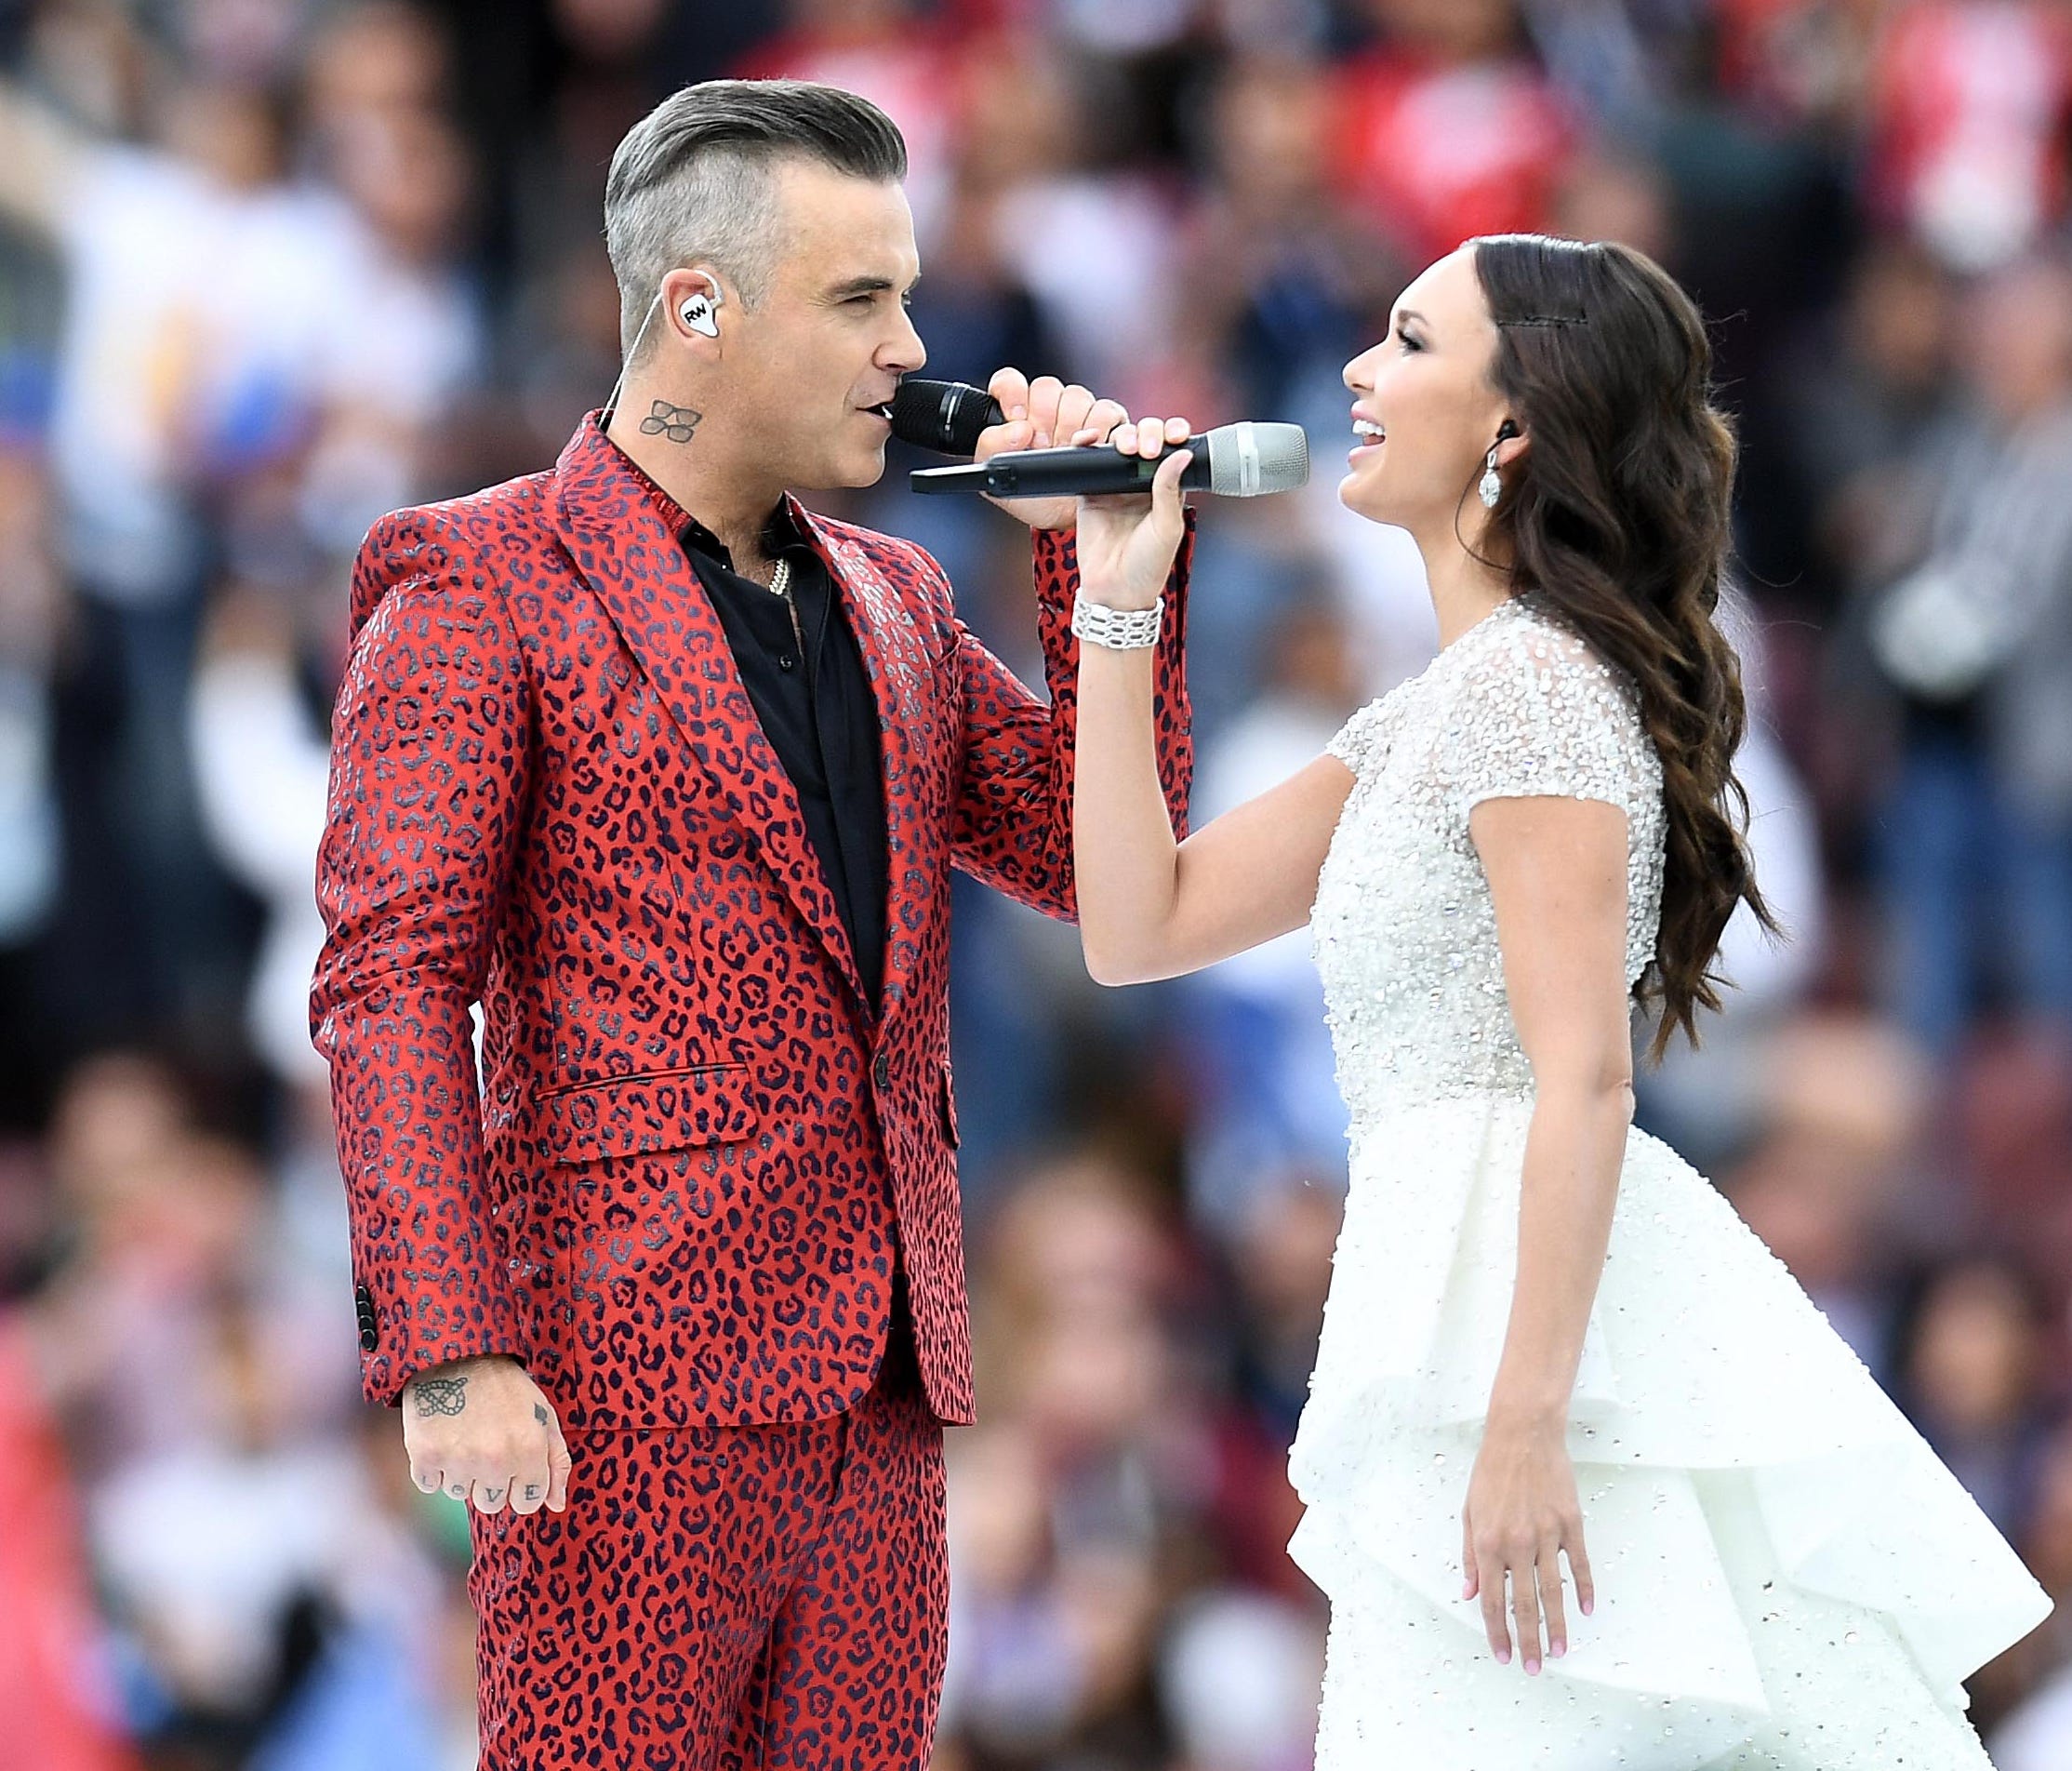 Recording artists Robbie Williams and Aida Garifullina perform during the World Cup opening ceremony.